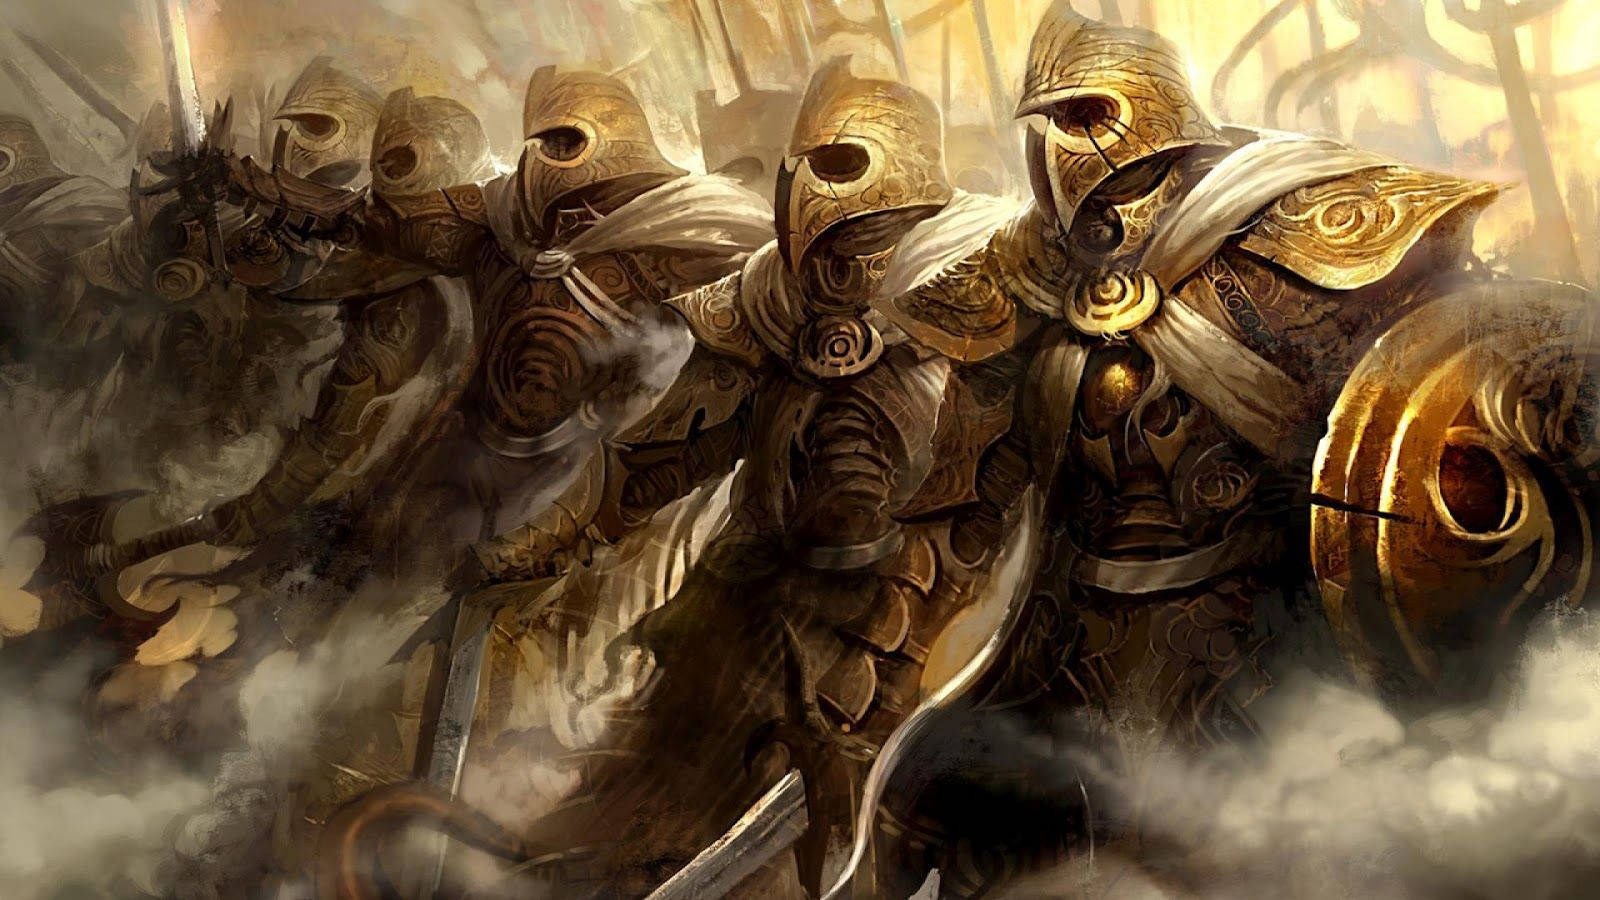 Armored Knights Fight for Honor in a Medieval Guild War Wallpaper